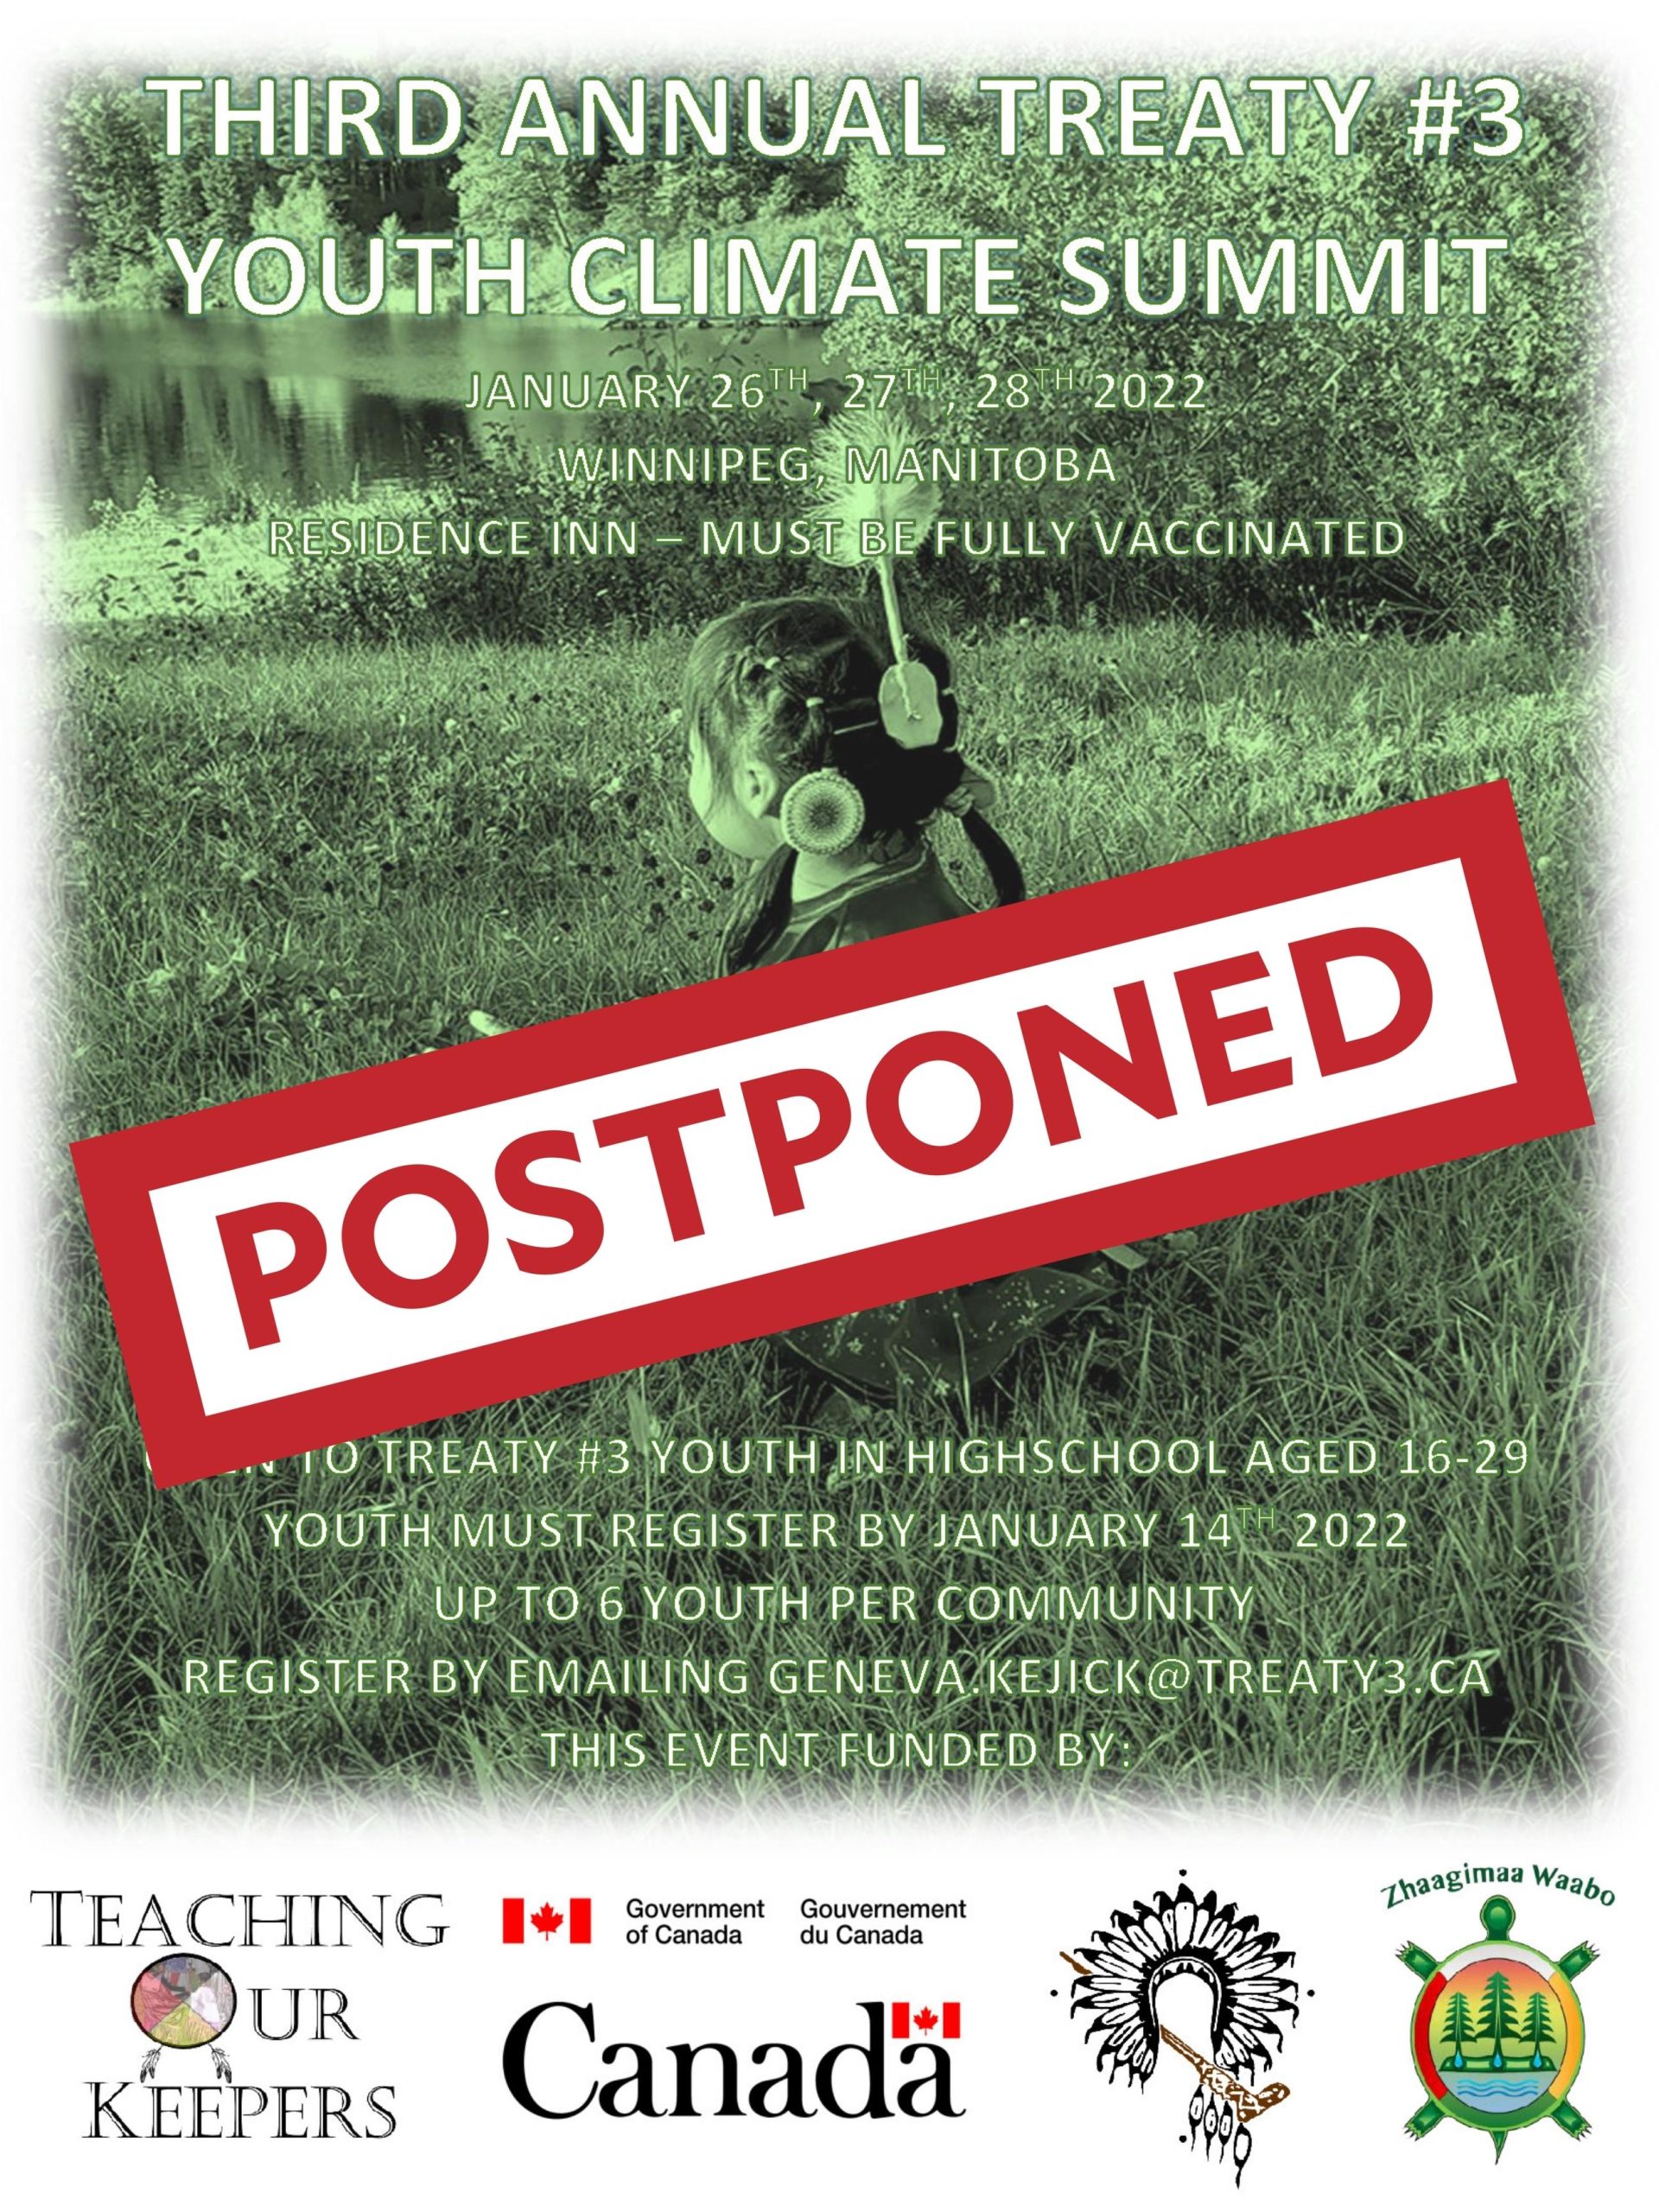 3rd Annual Treaty #3 Youth Climate Summit 2022 (POSTPONED)